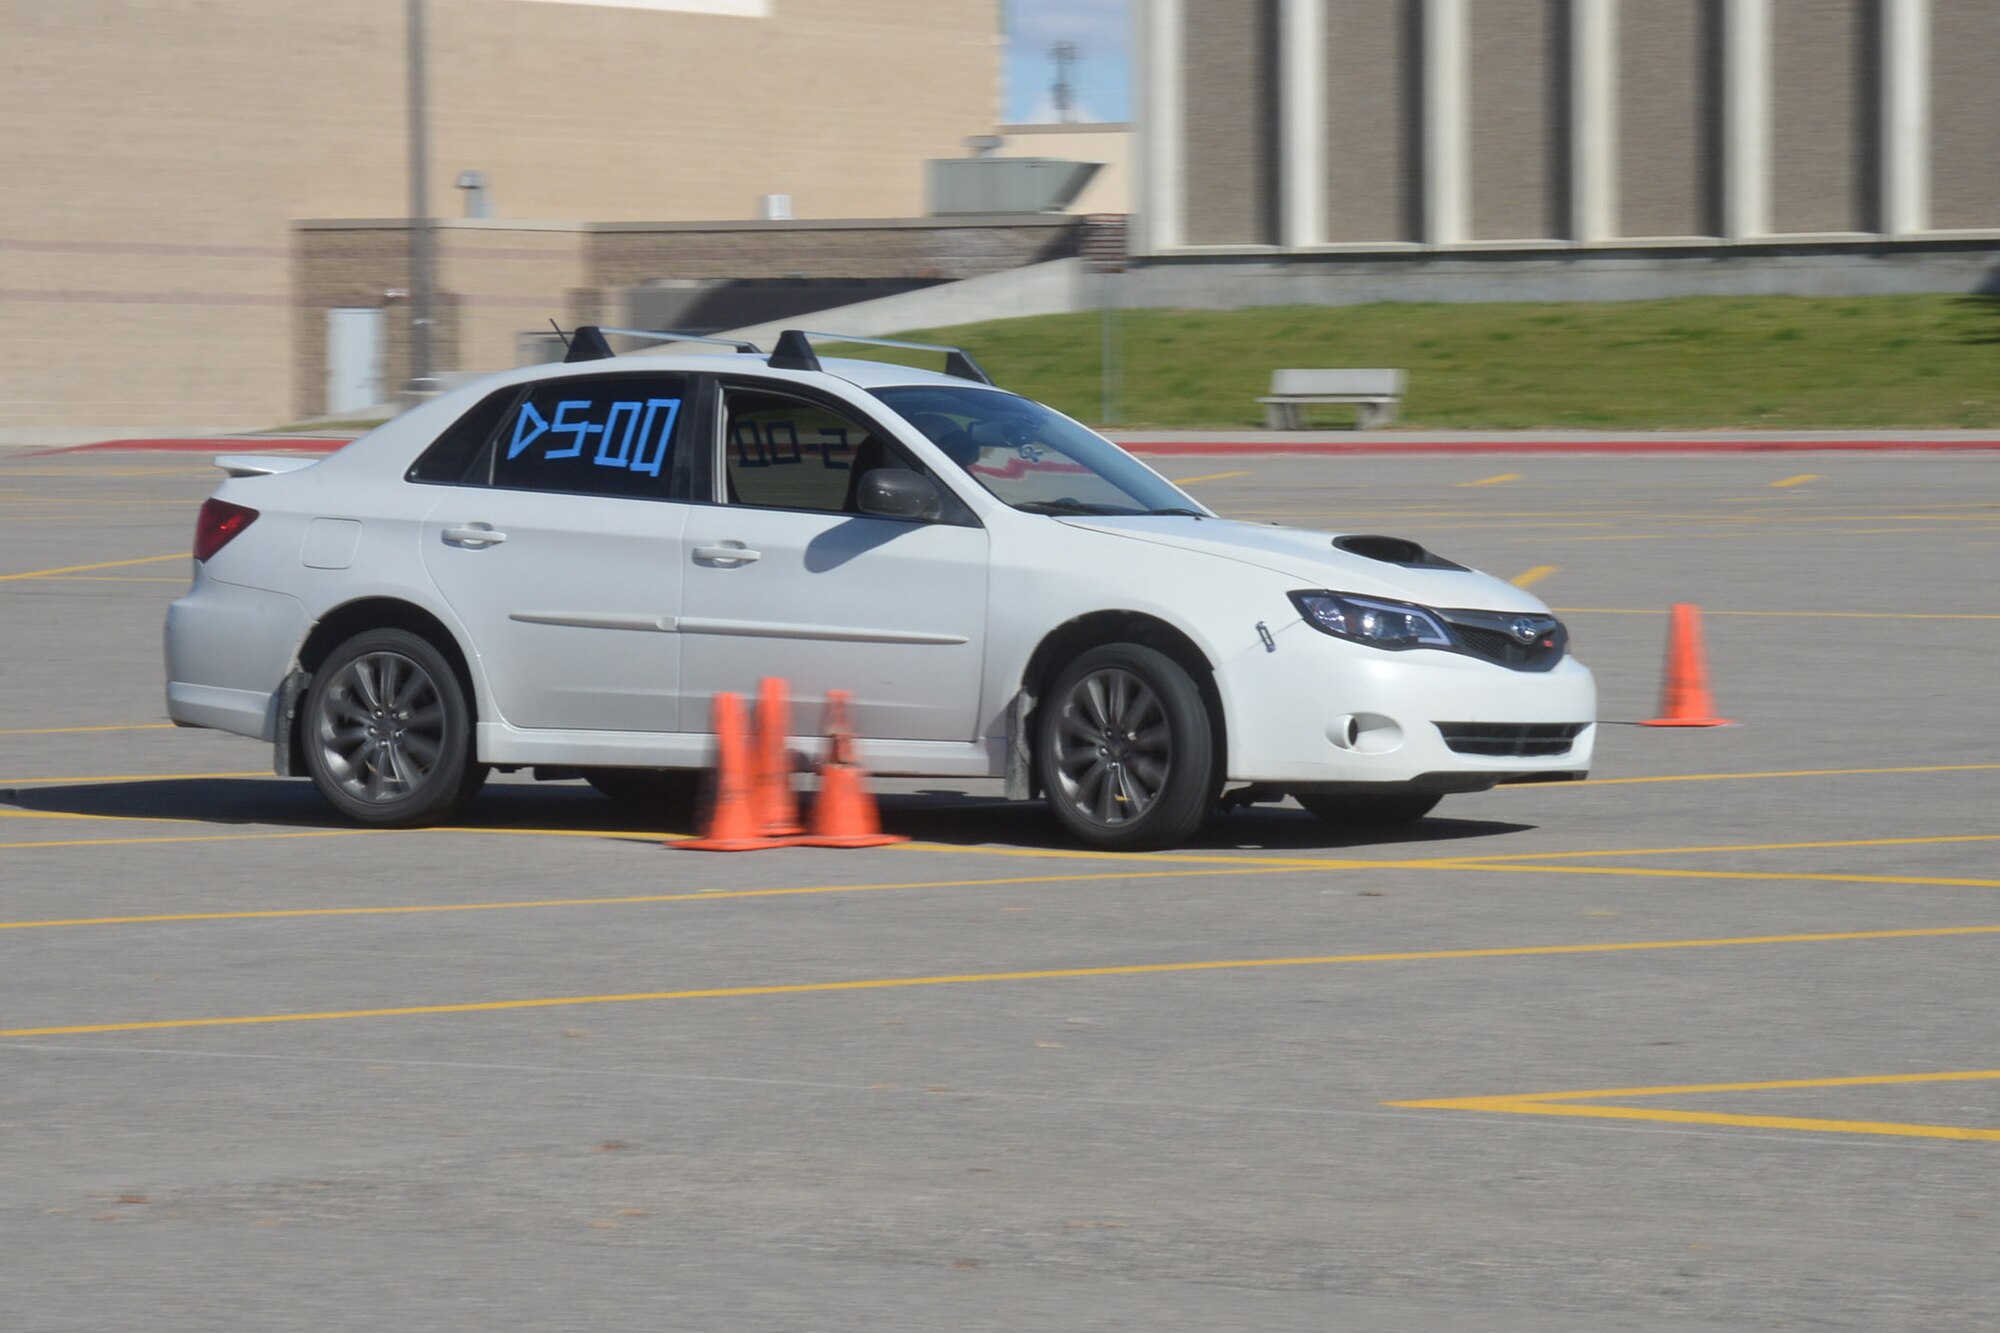 Staff Sgt. Juan Cimental, 341st Force Support Squadron sports program manager, passes an obstacle during an autocross event Oct. 7, 2018, in Great Falls, Mont.